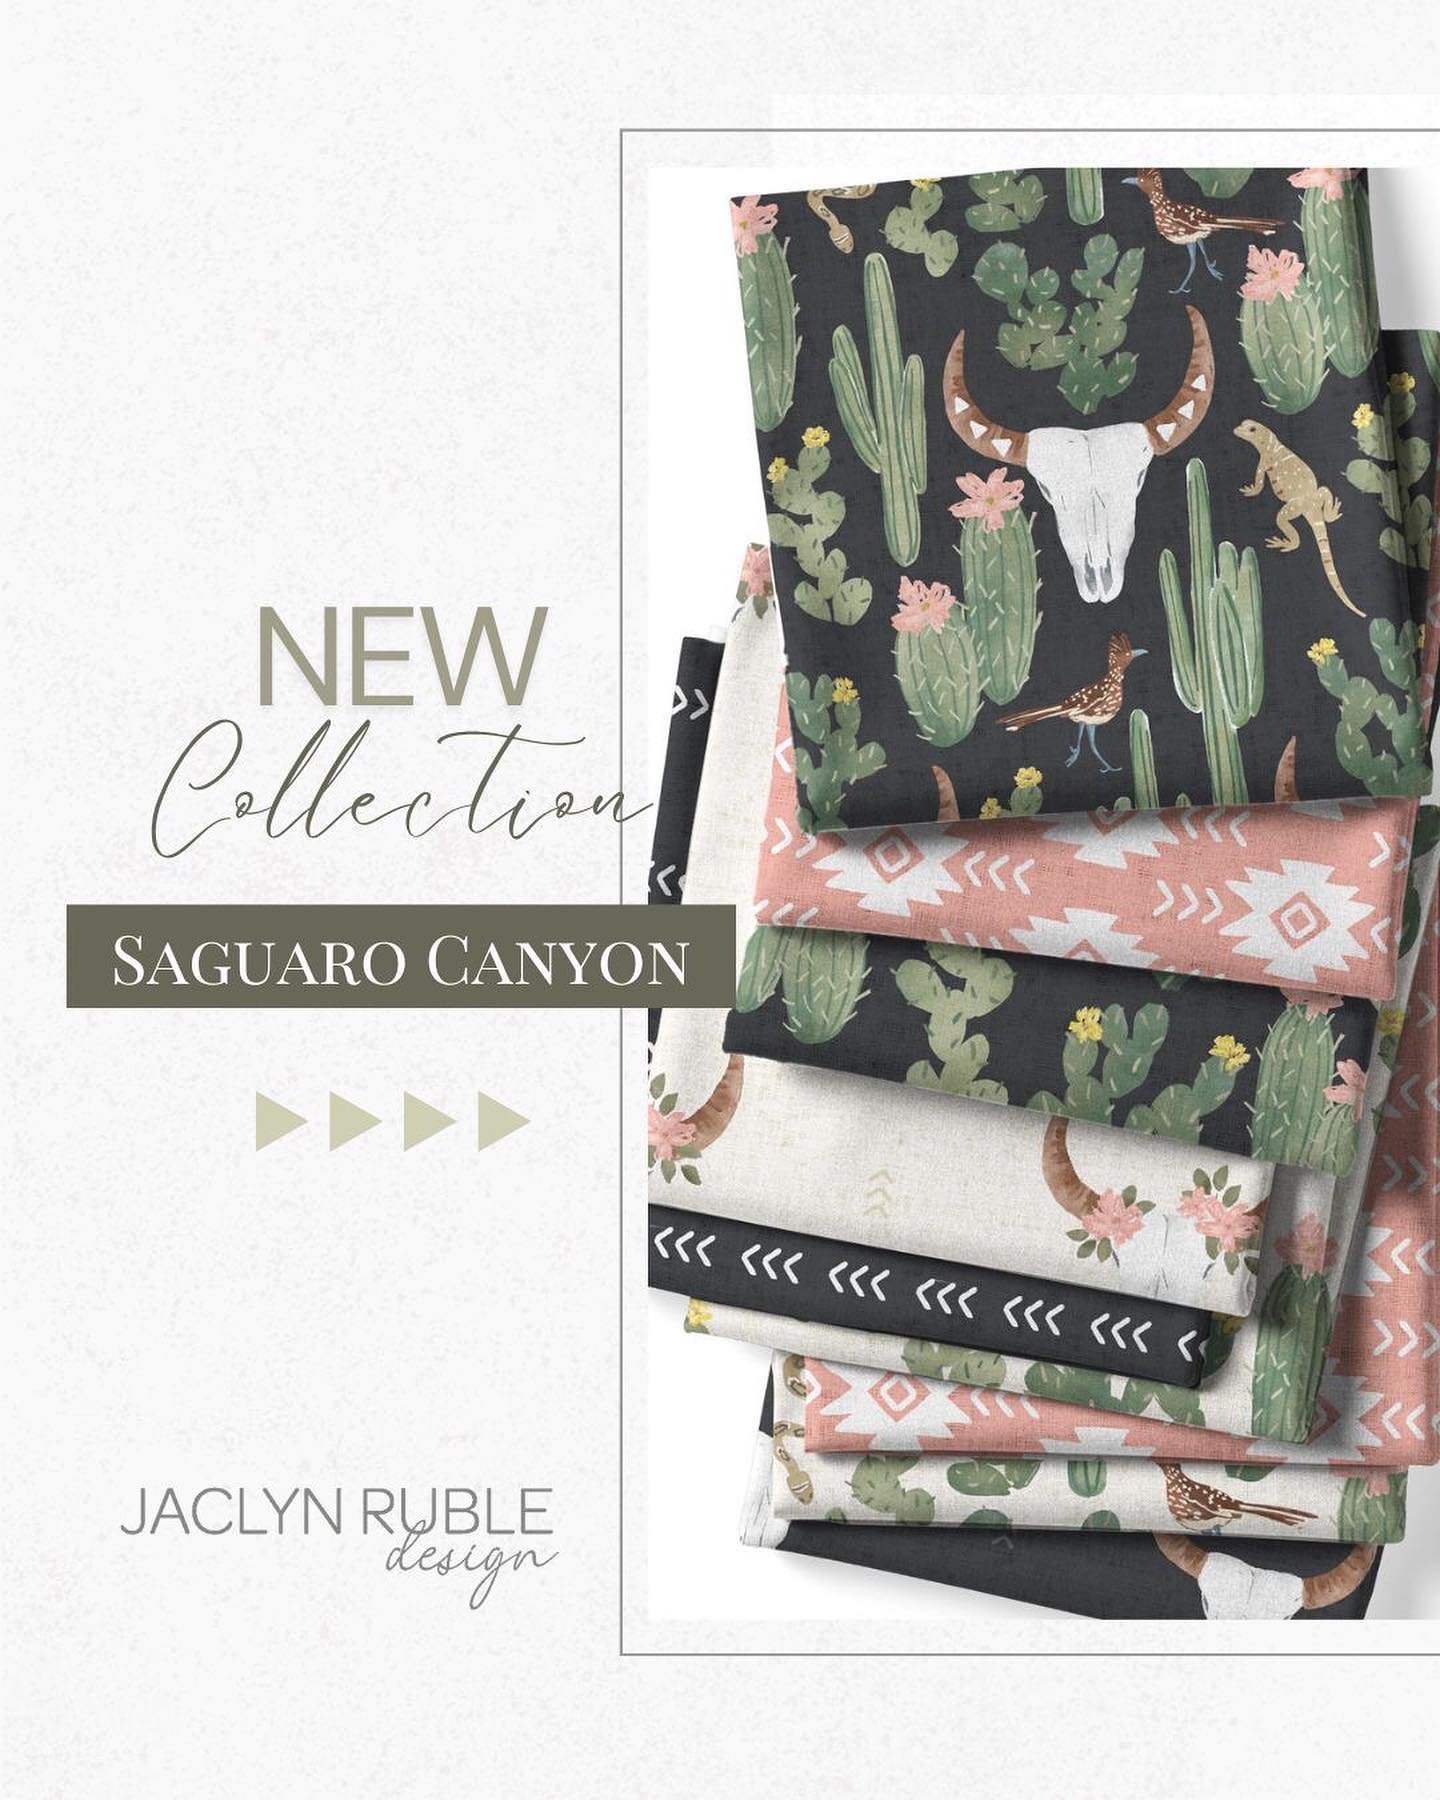 My new collection Saguaro Canyon is now available on @spoonflower and @raspberrycreekfabrics &gt;links in bio!🌵🌵🌵 

This collection was so much fun to create and took me back to my trips out west!

These watercolor designs have a subtle color pale